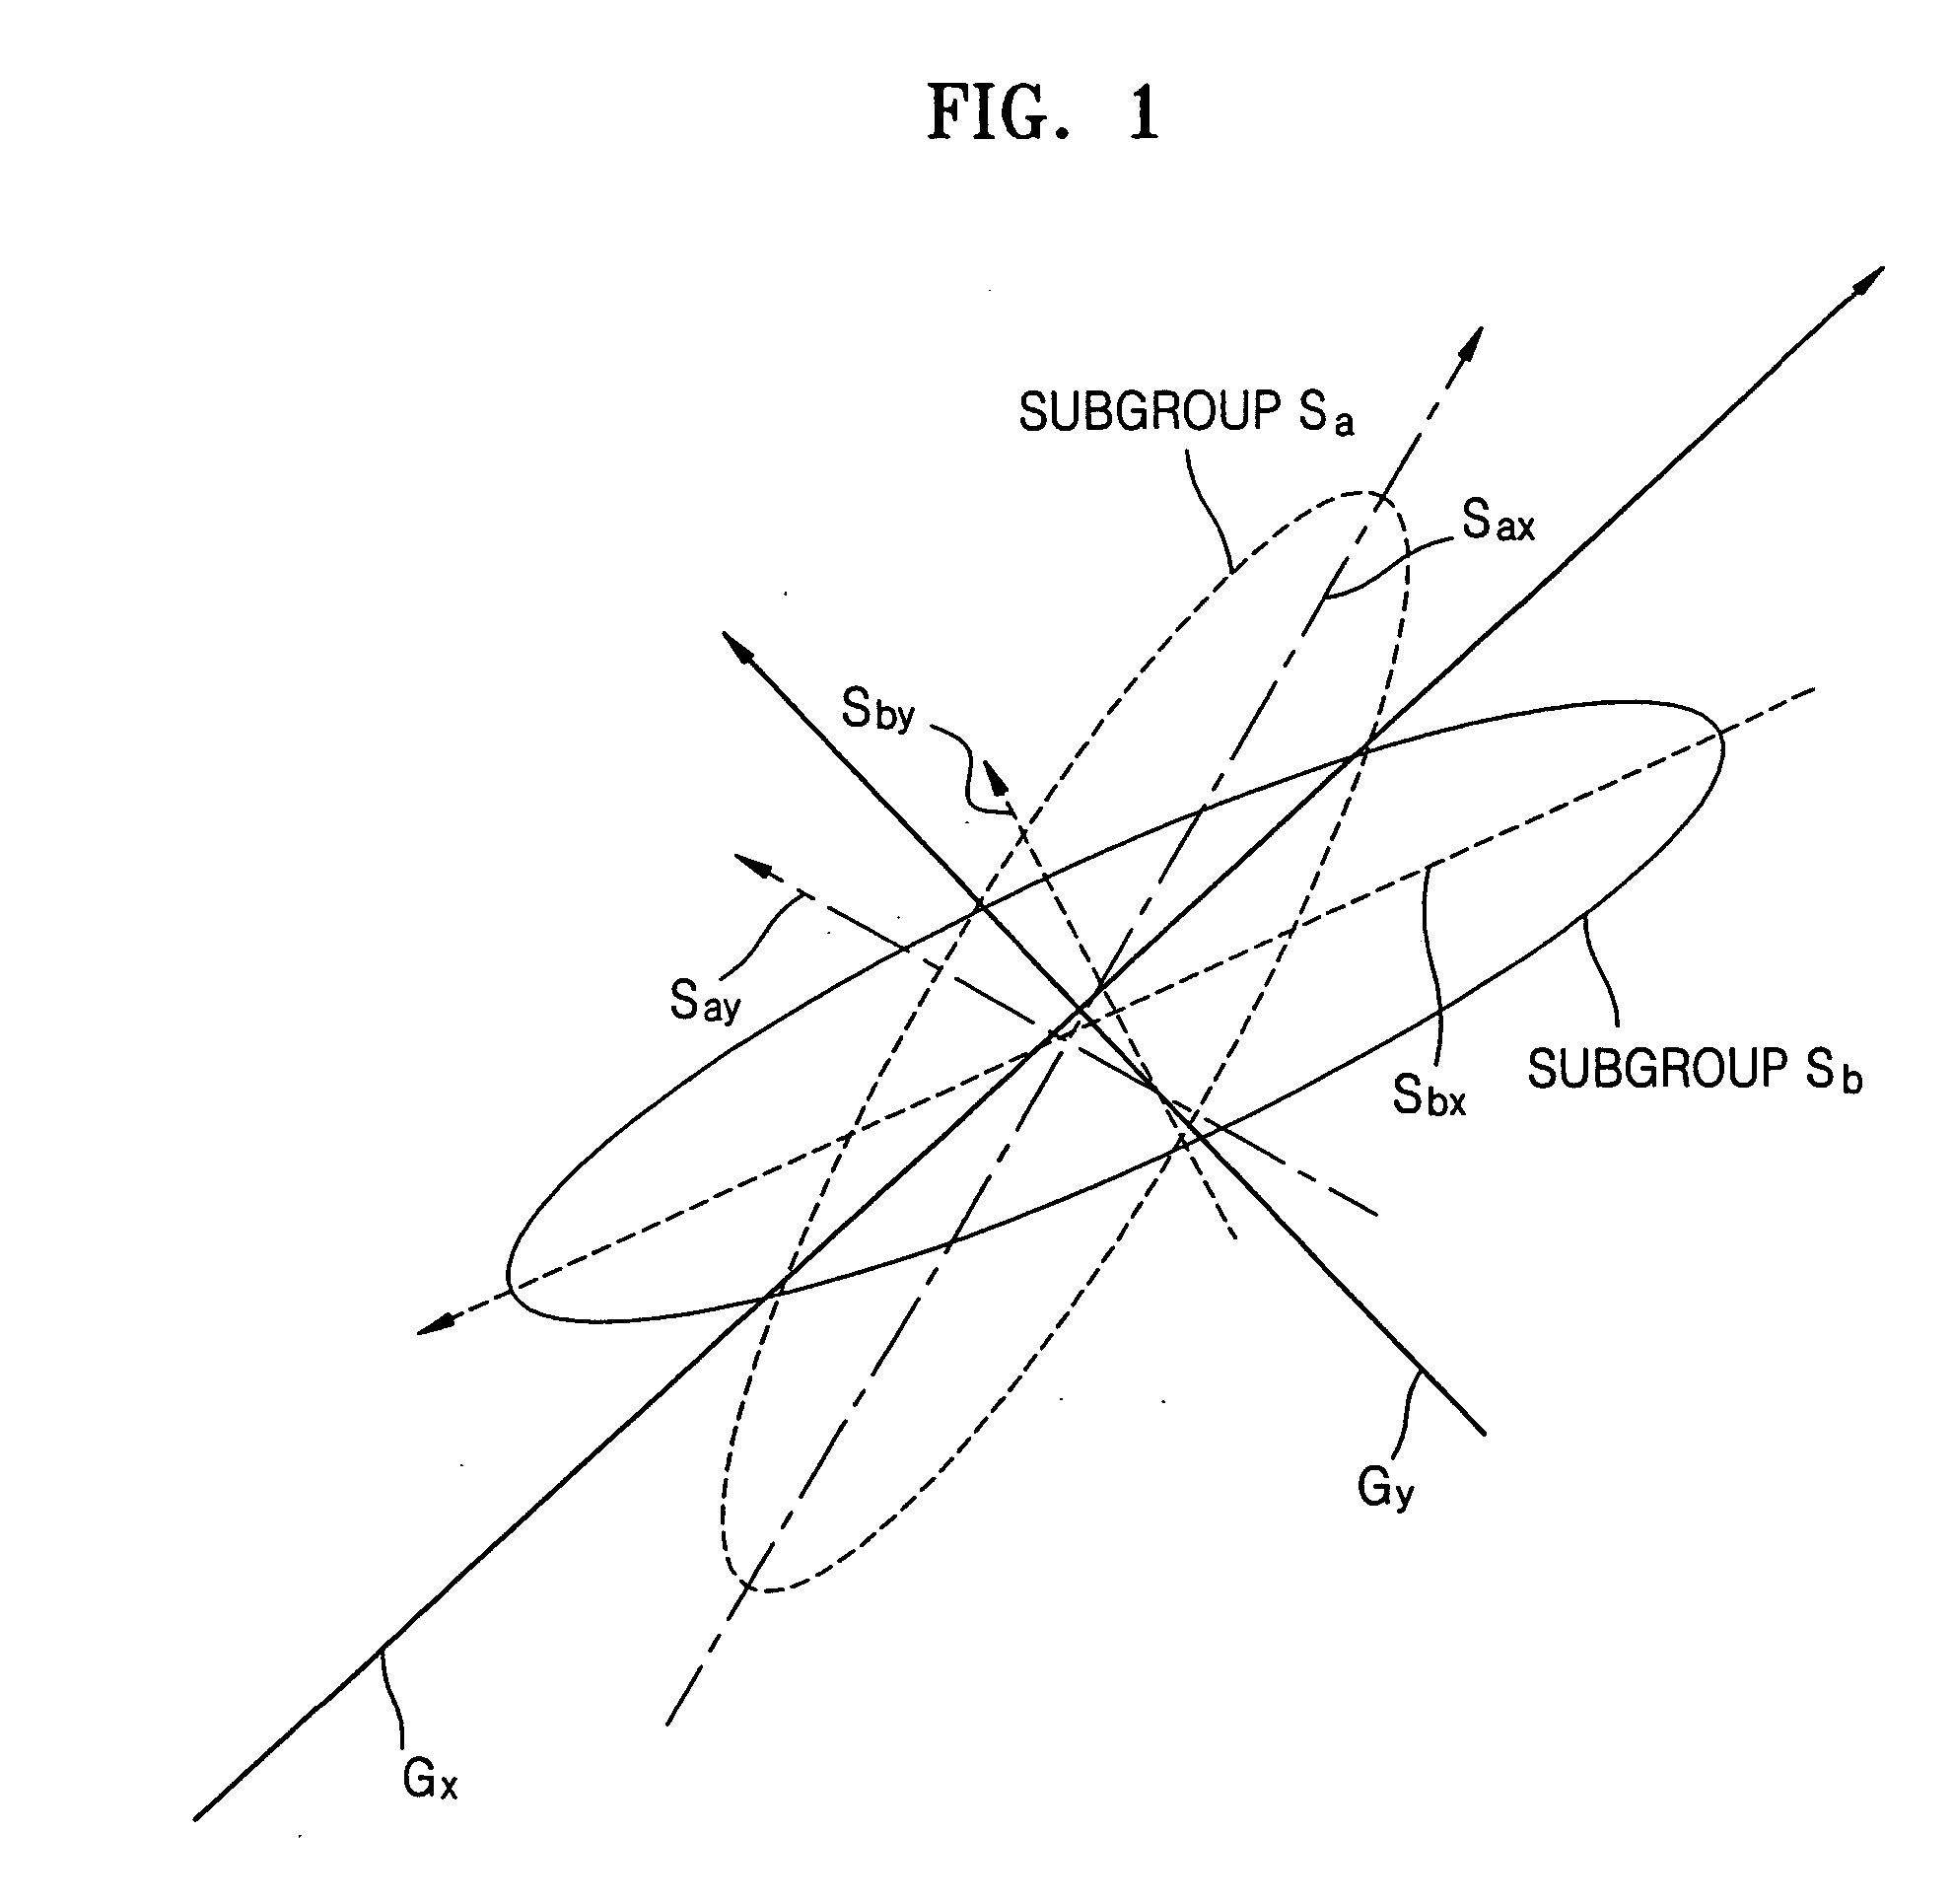 Face recognition apparatus and method using PCA learning per subgroup